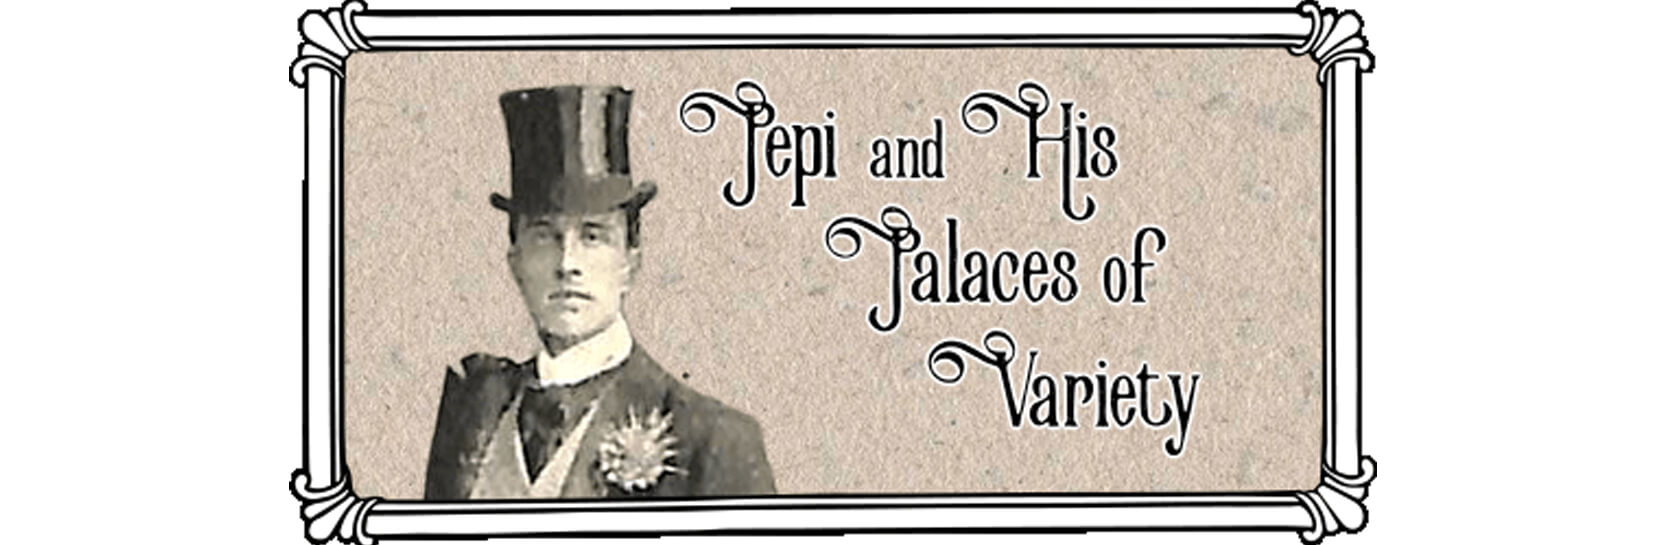 Darlington Hippodrome PowerPoint Slides - Topic 1 - Pepi and his Palaces of Variety